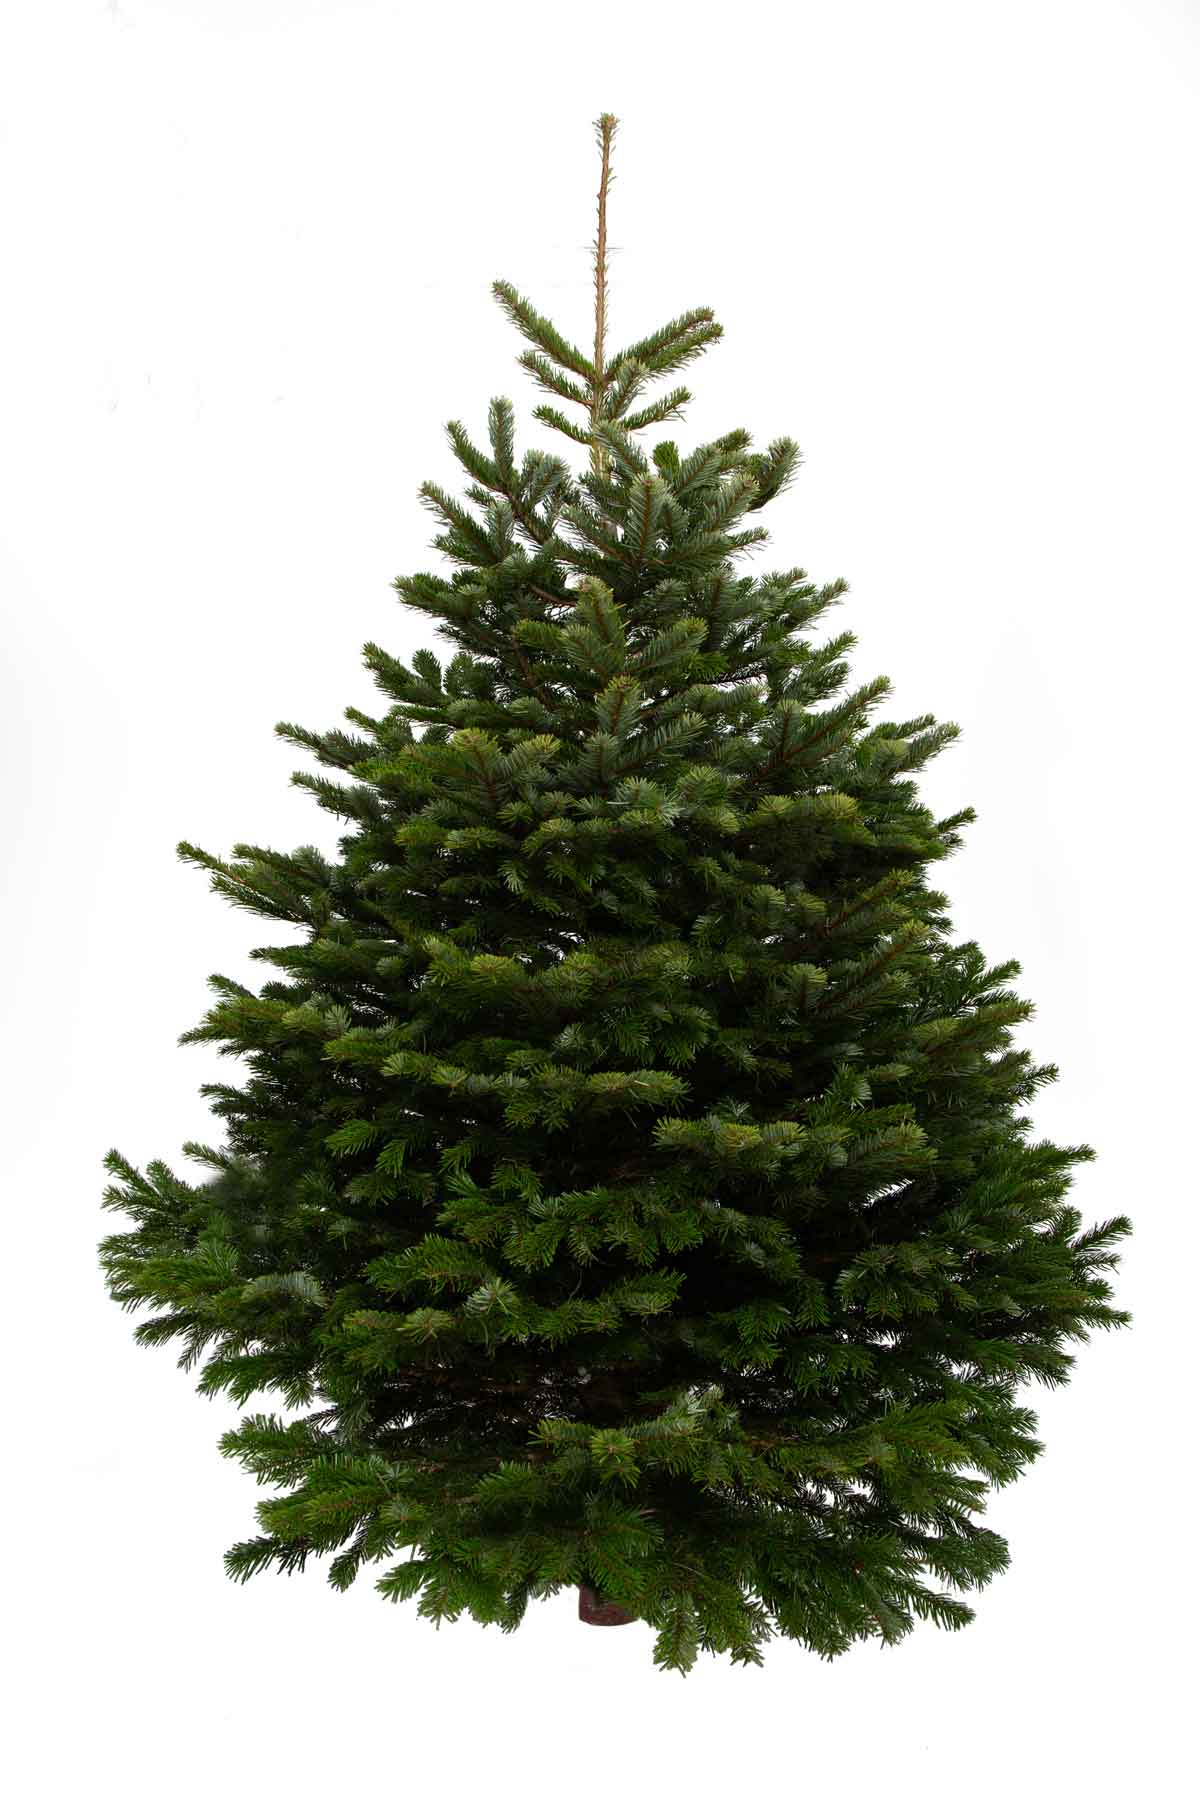 Indoor Christmas Tree - Nordmann Fir - from Pines and Needles